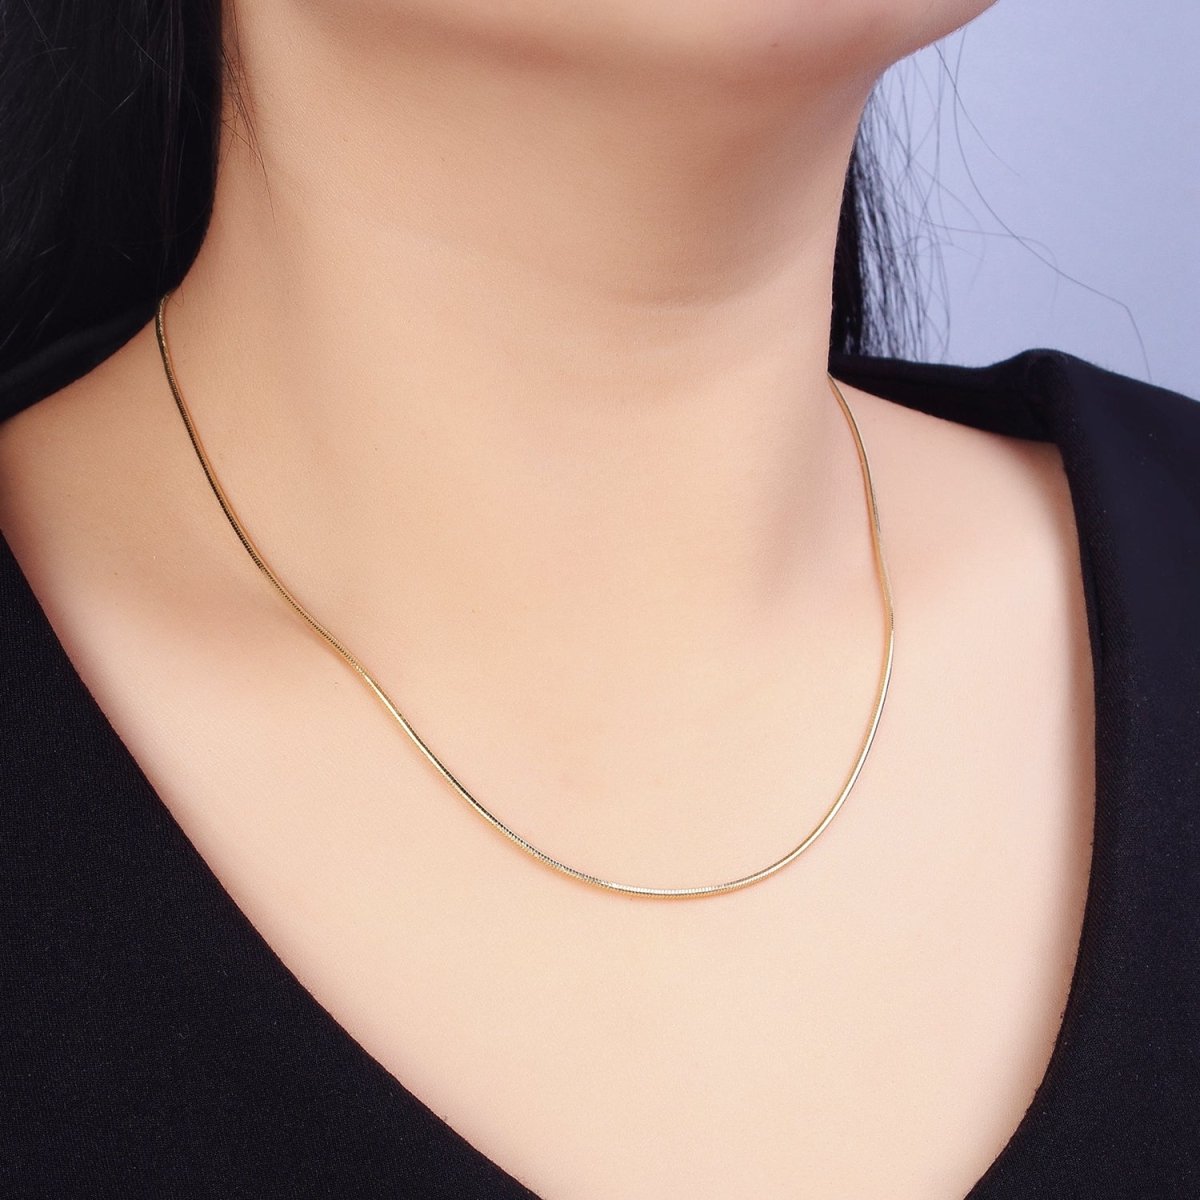 Gold Snake Chain Necklace - Gold Filled Herringbone Necklace, Thin Herringbone Chain 18 inch Necklace | WA-1639 Clearance Pricing - DLUXCA